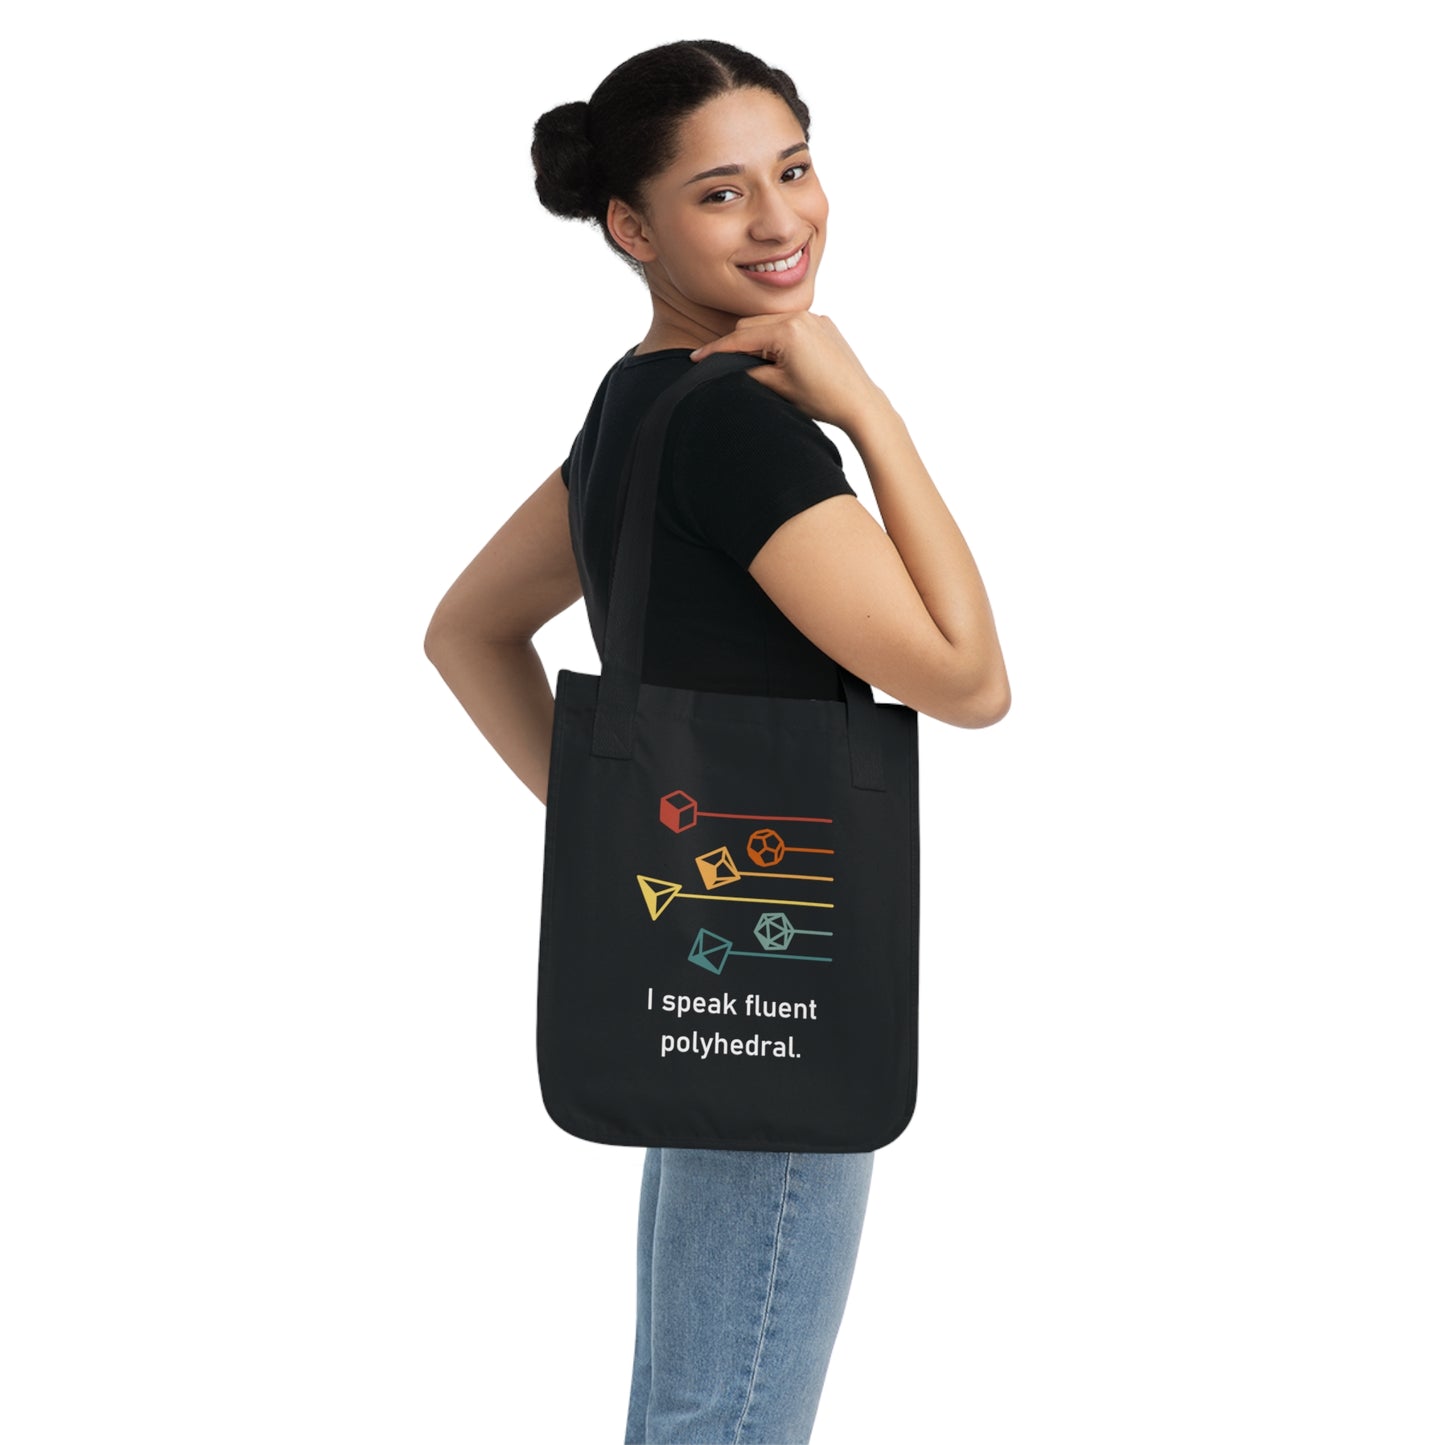 I Speak Fluent Polyhedral Organic Canvas Tote Bag, D&D Tote, DnD Bag of Holding, Eco-friendly Tote, Double-Sided Print